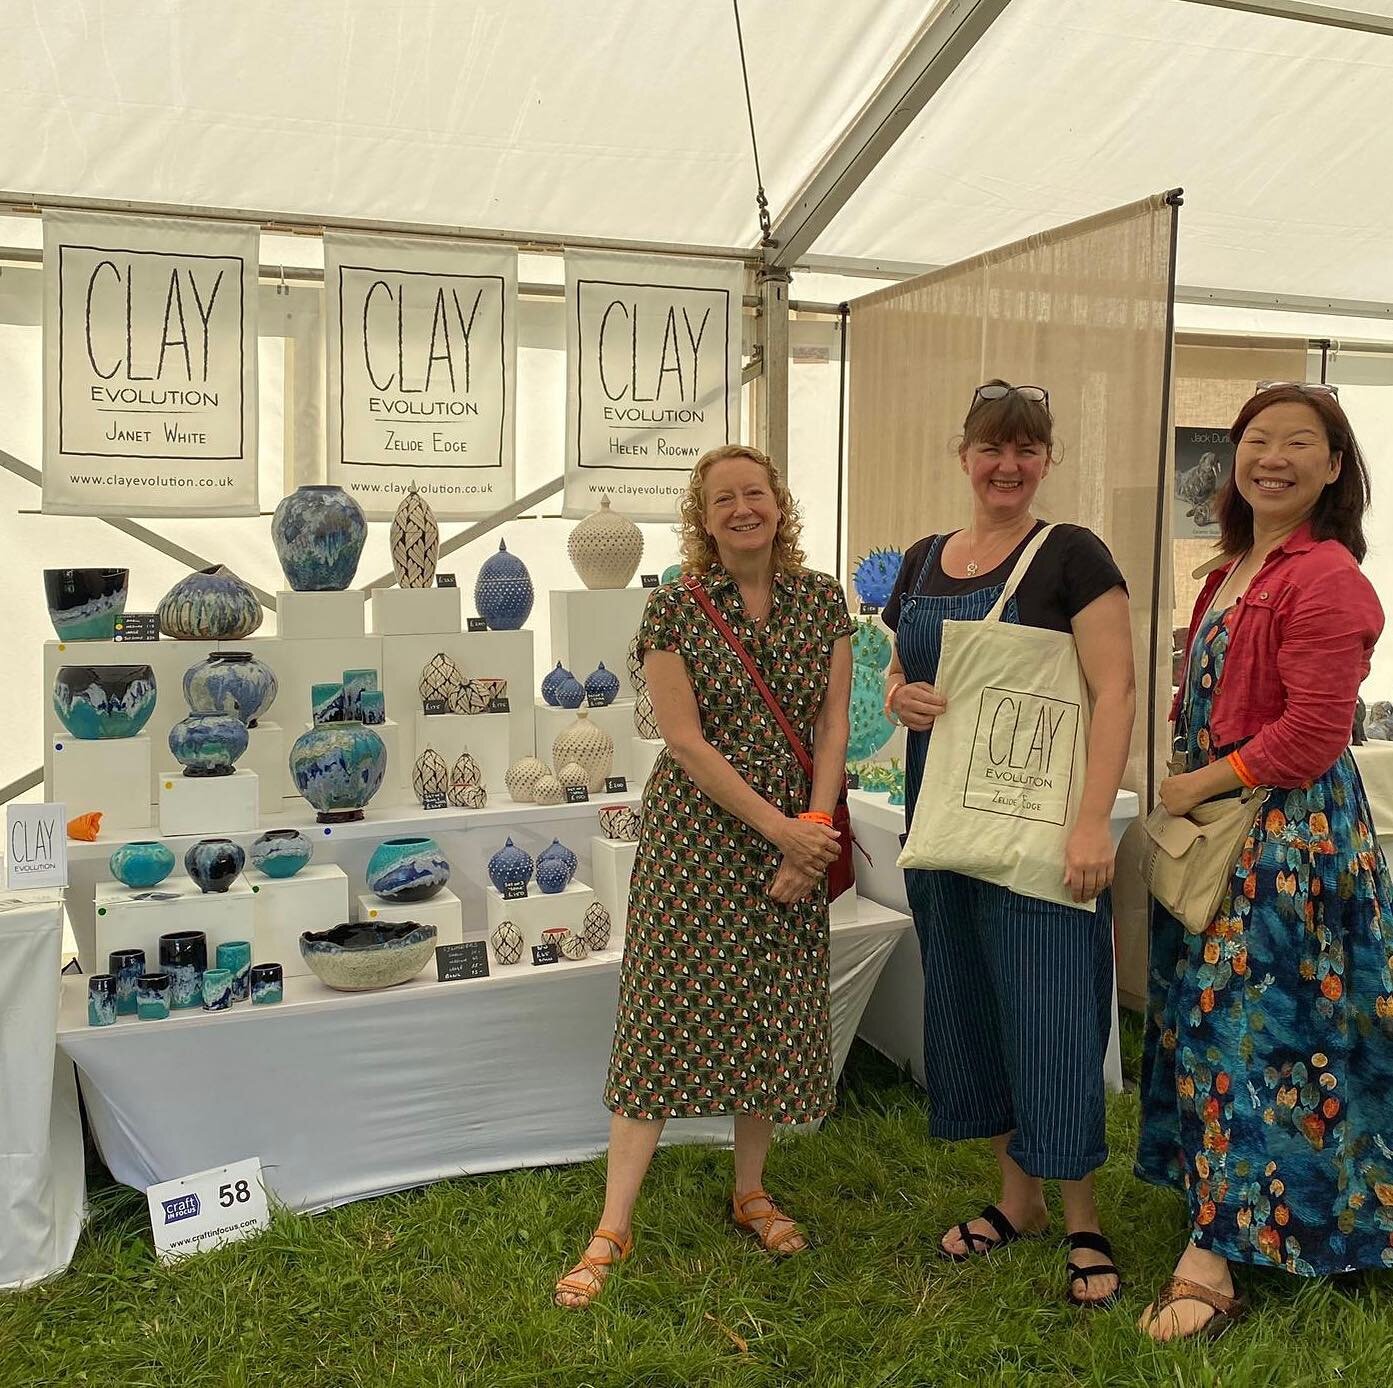 A massive THANK YOU to family, friends, followers, fellow ceramicists and customers to our stand @celebratingceramics last weekend. We value your support. News on how to join our mailing list soon! 

@london.potters 
#londonpotters
#lpmember
#pottery